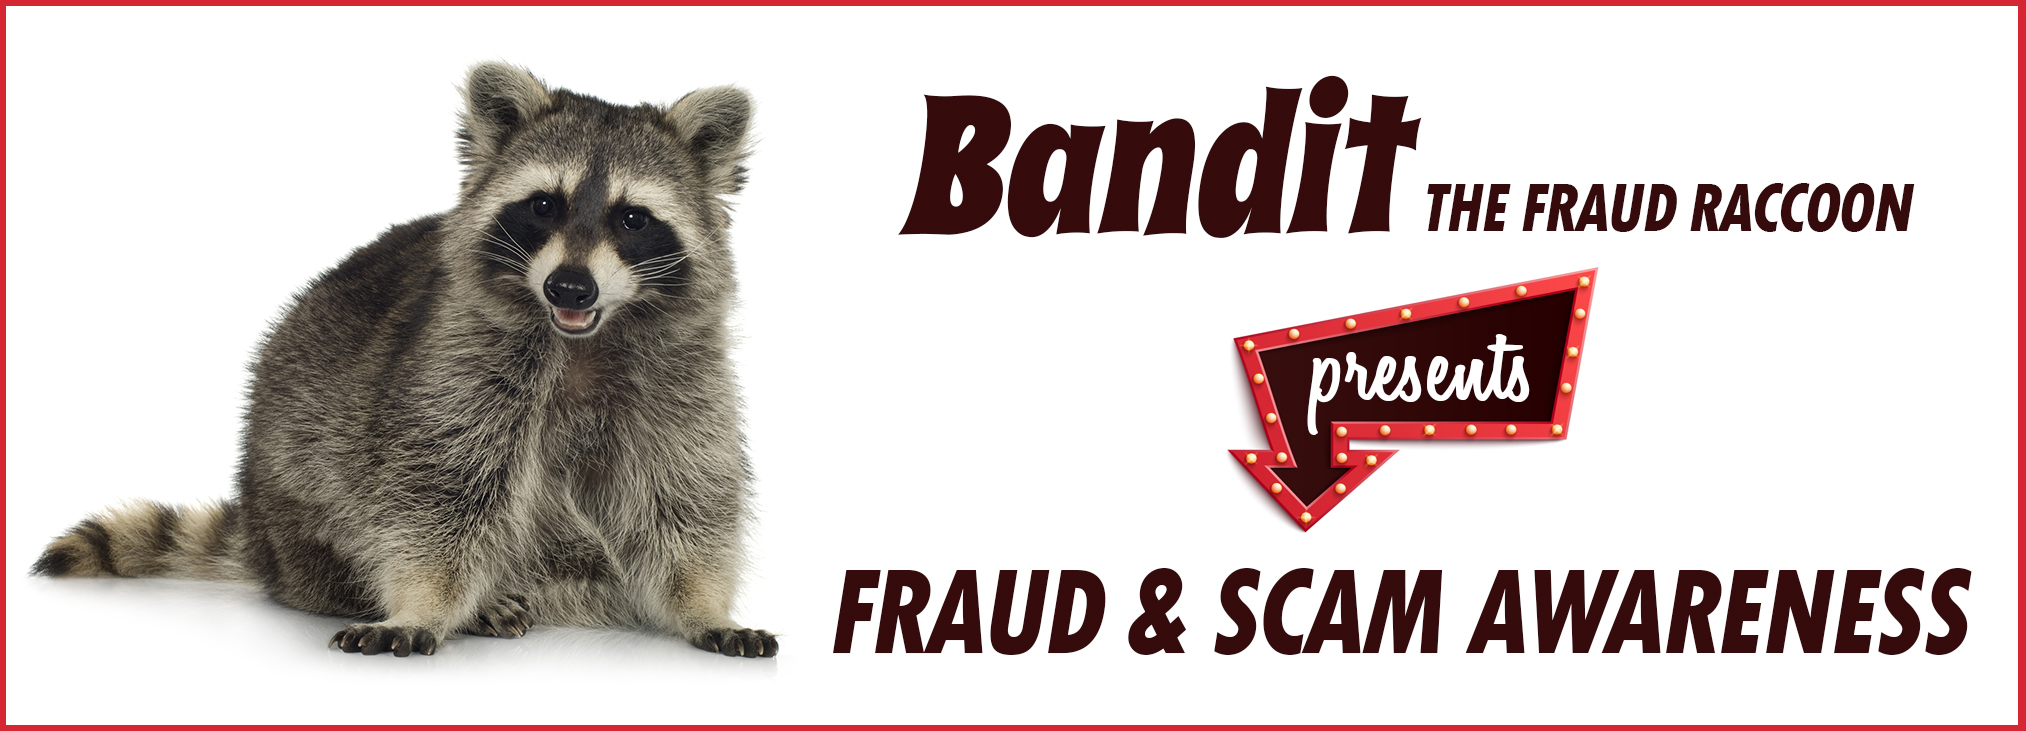 Bandit the Fraud Raccoon presents fraud and scam awareness